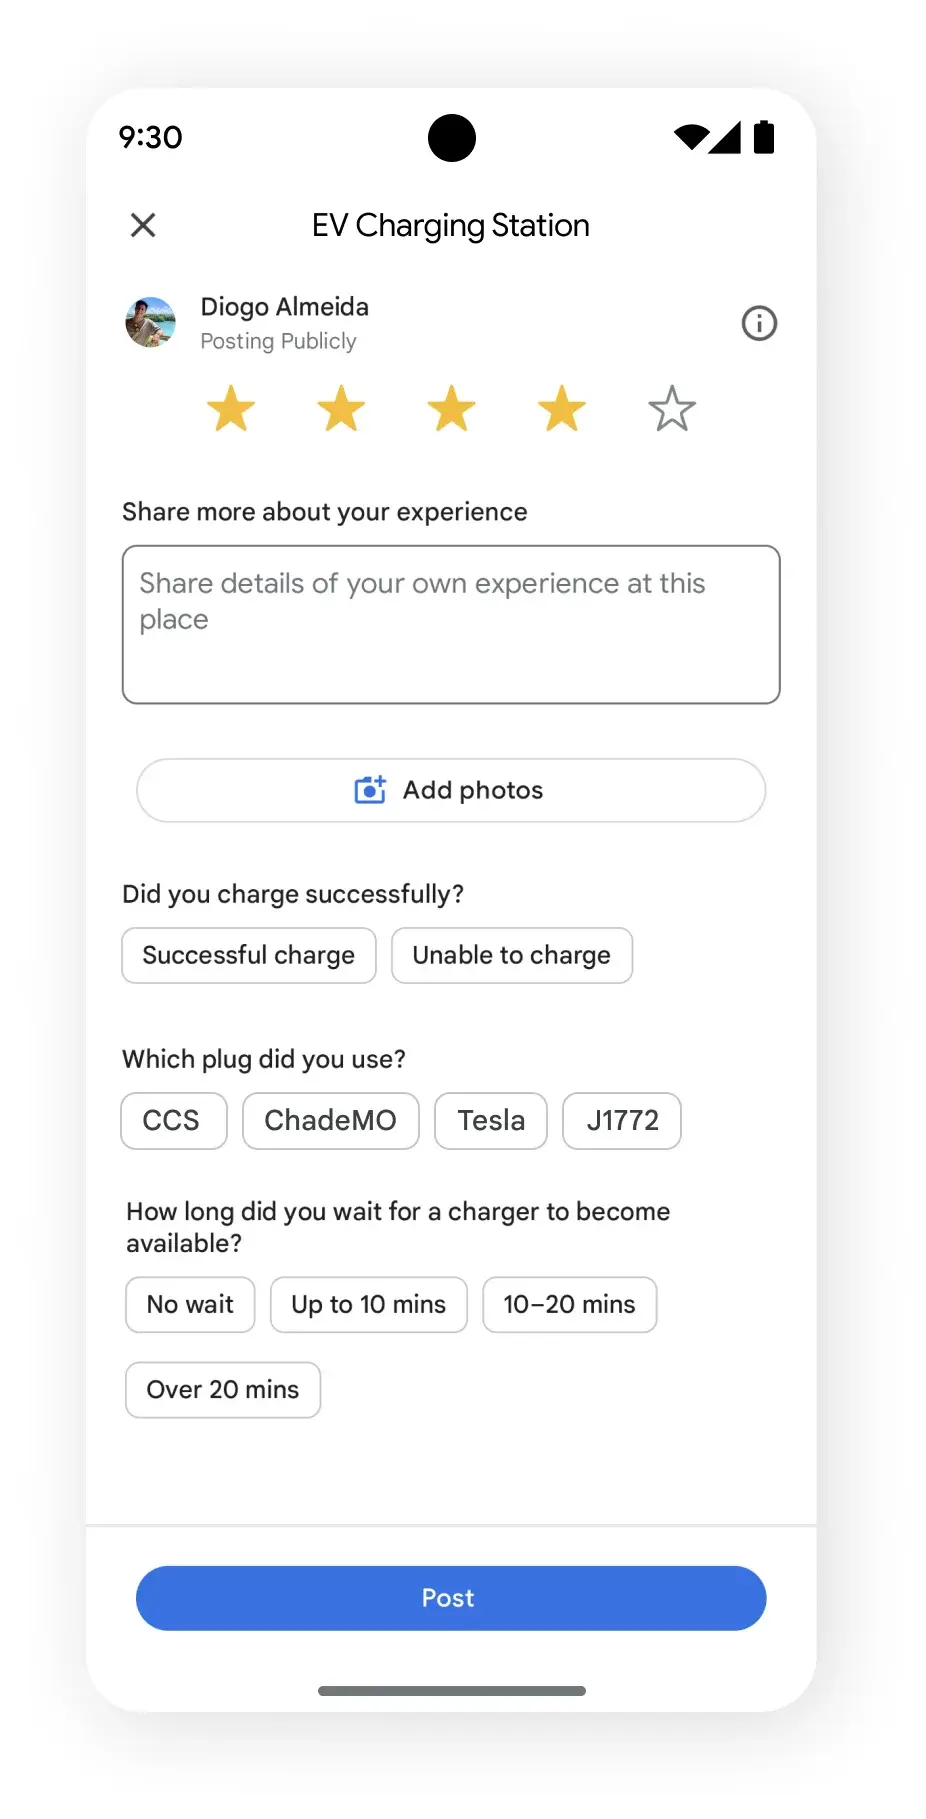 (Image Source - Google) Reviews for EV charging stations - Google Maps will provide detailed directions to EV charging stations and more info for drivers